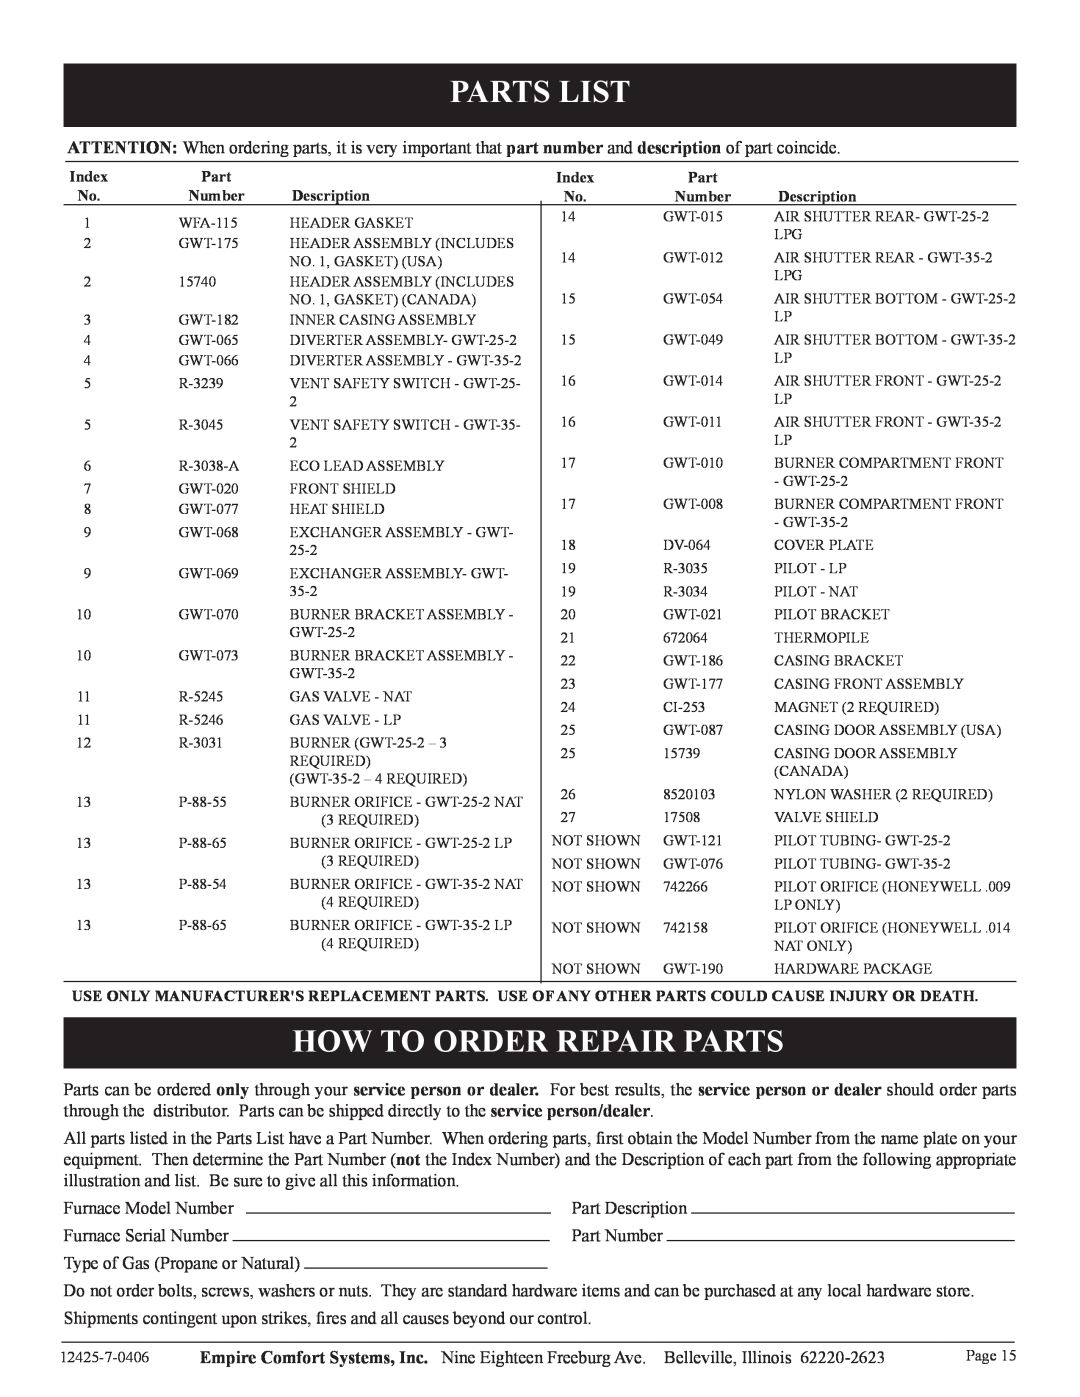 Empire Products GWT-35-2, RB), GWT-25-2 installation instructions Parts List, How To Order Repair Parts 